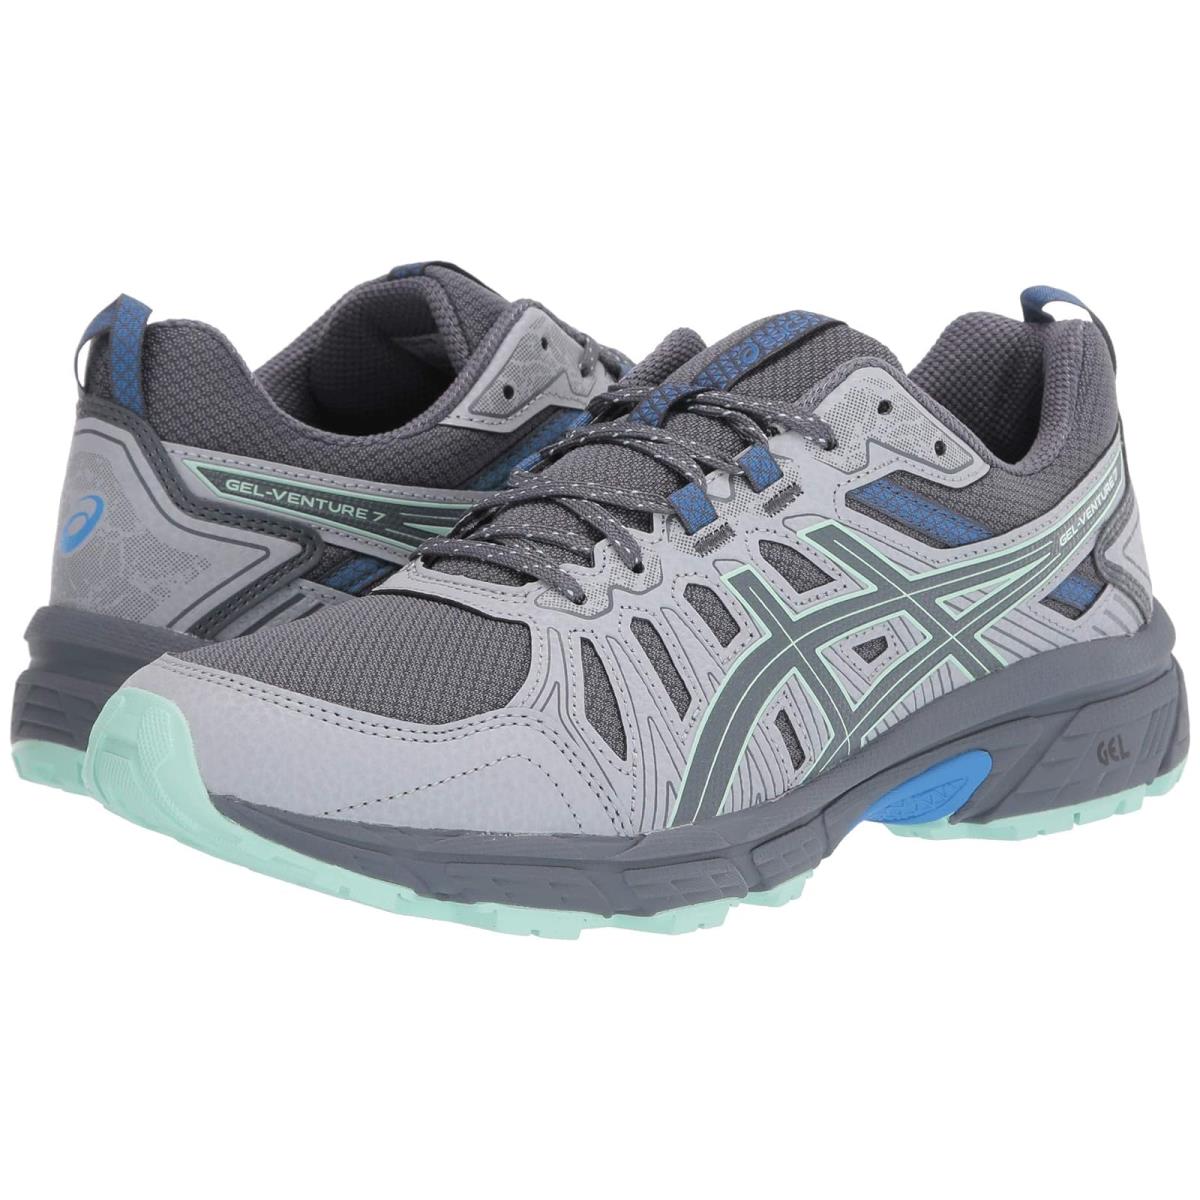 Woman`s Sneakers Athletic Shoes Asics Gel-venture 7 Sheet Rock/Ice Mint